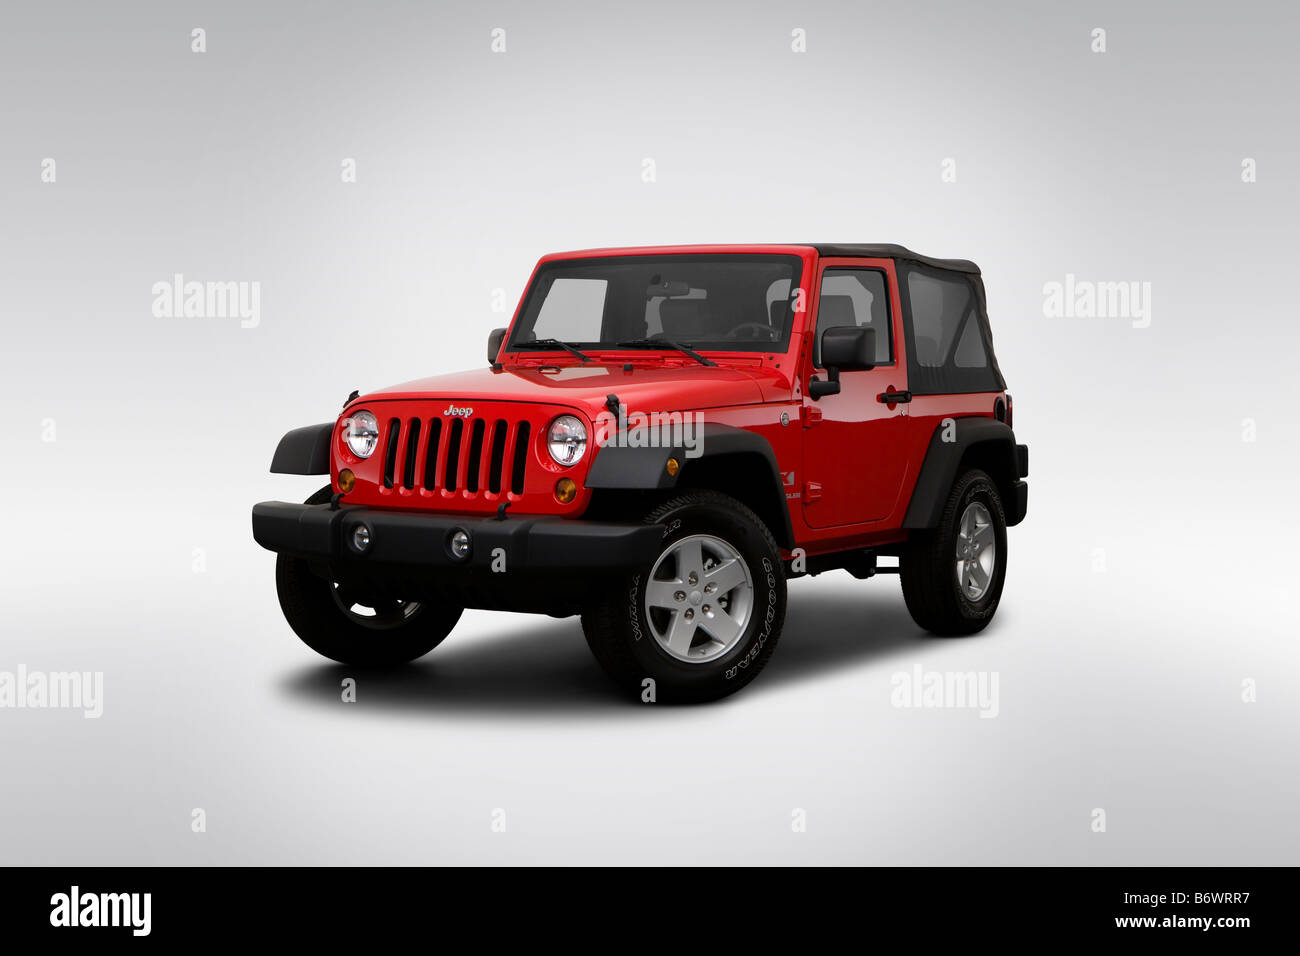 2009 Jeep Wrangler X in Red - Front angle view Stock Photo - Alamy